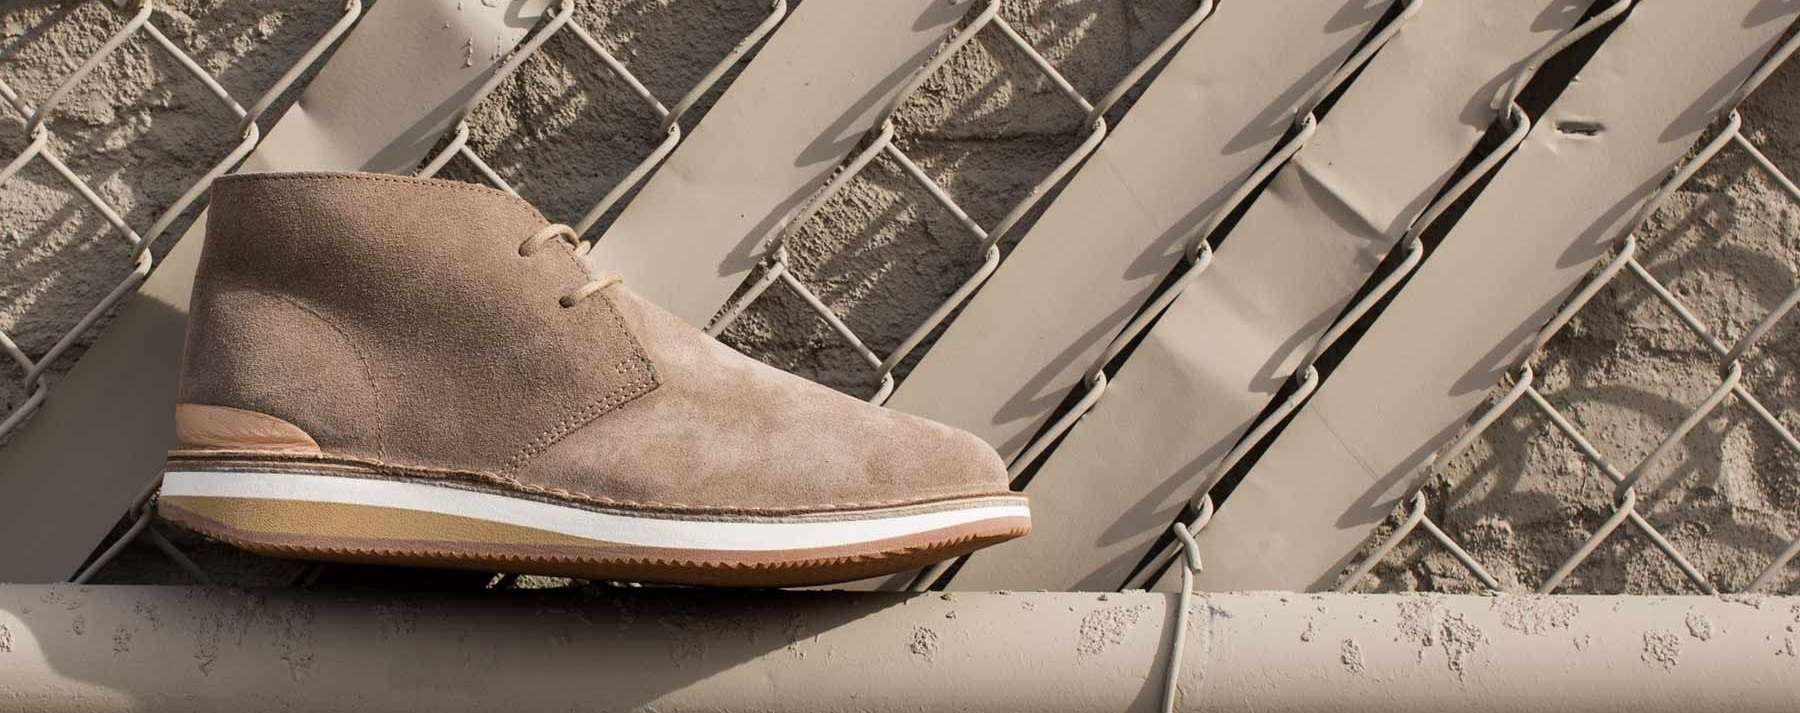 The Hirsh: A New Sport-Casual Shoe from Greats